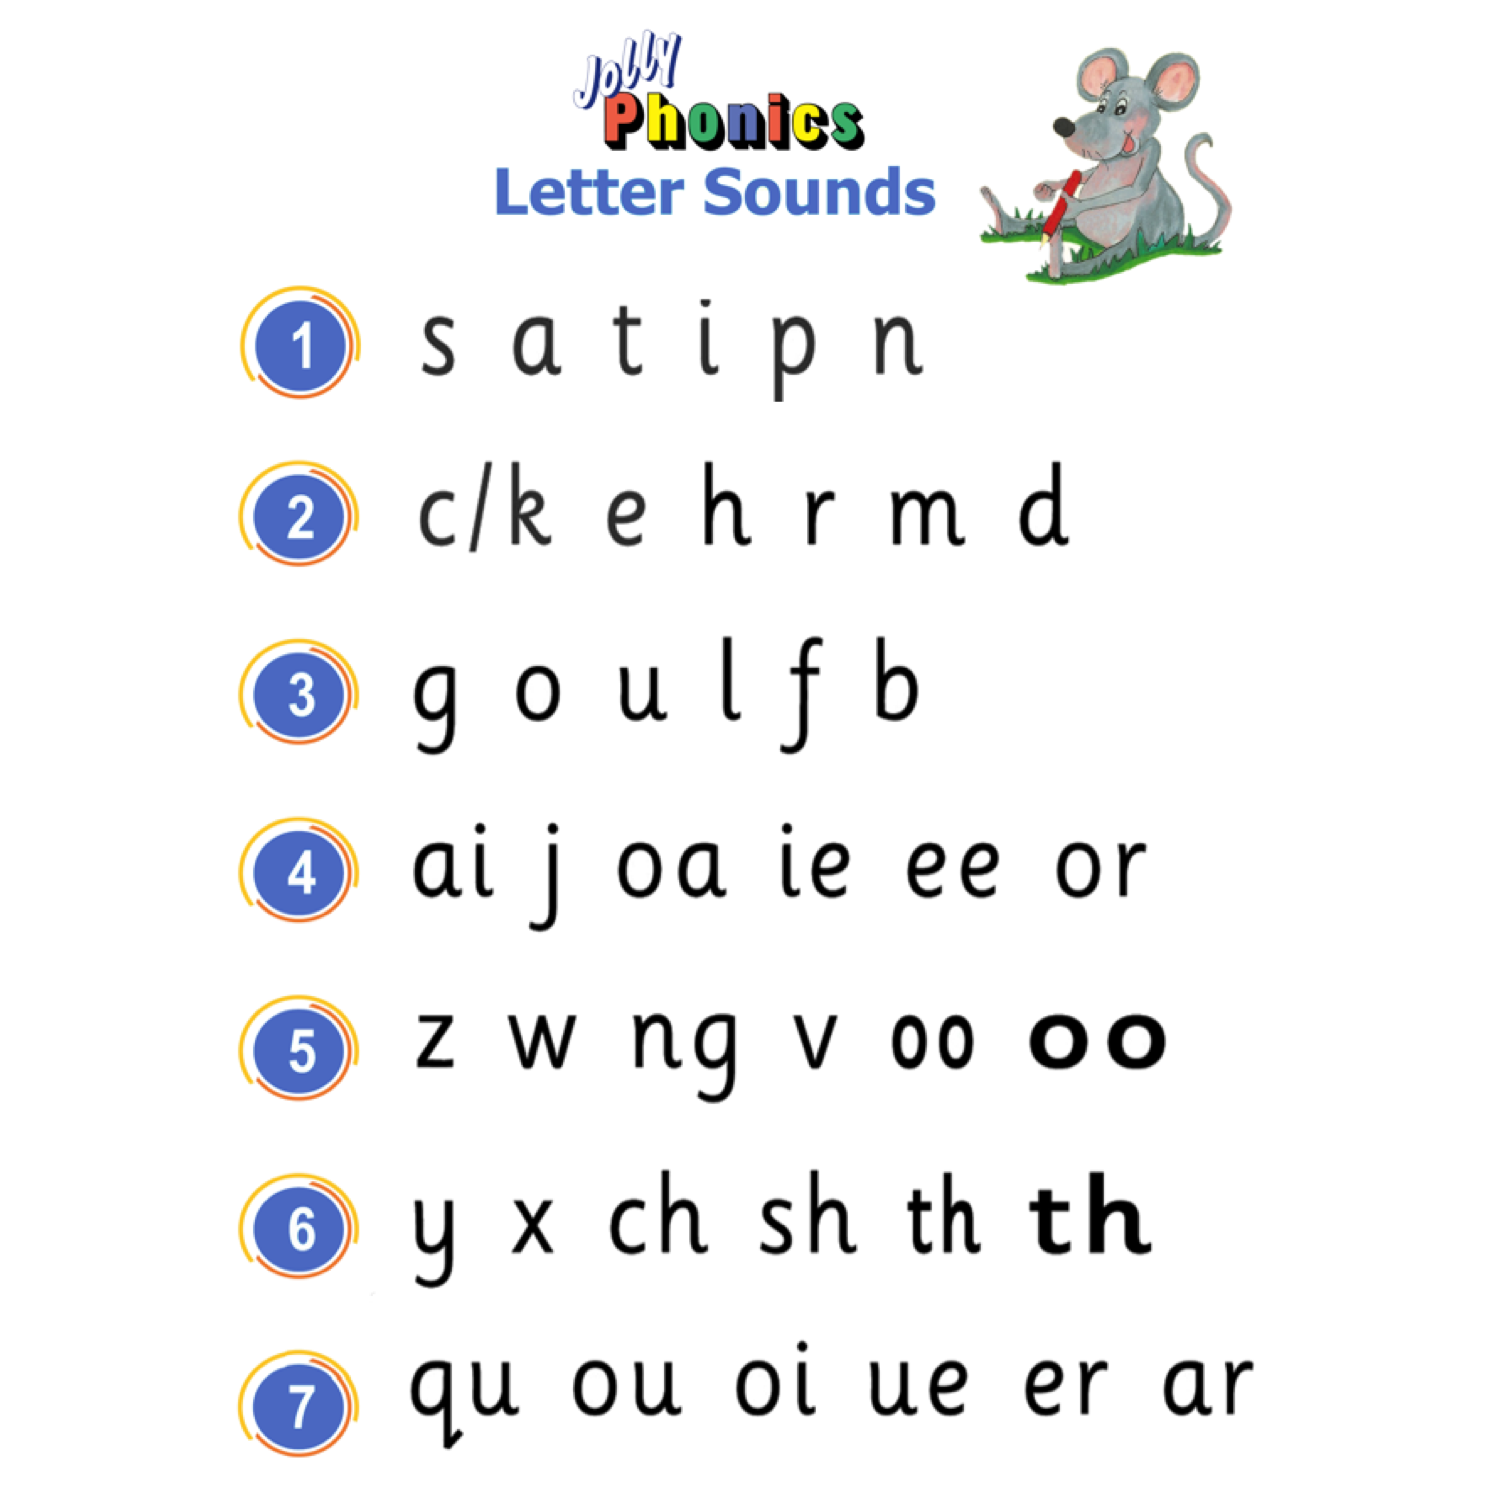 what-are-the-steps-to-teach-jolly-phonics-printable-templates-free